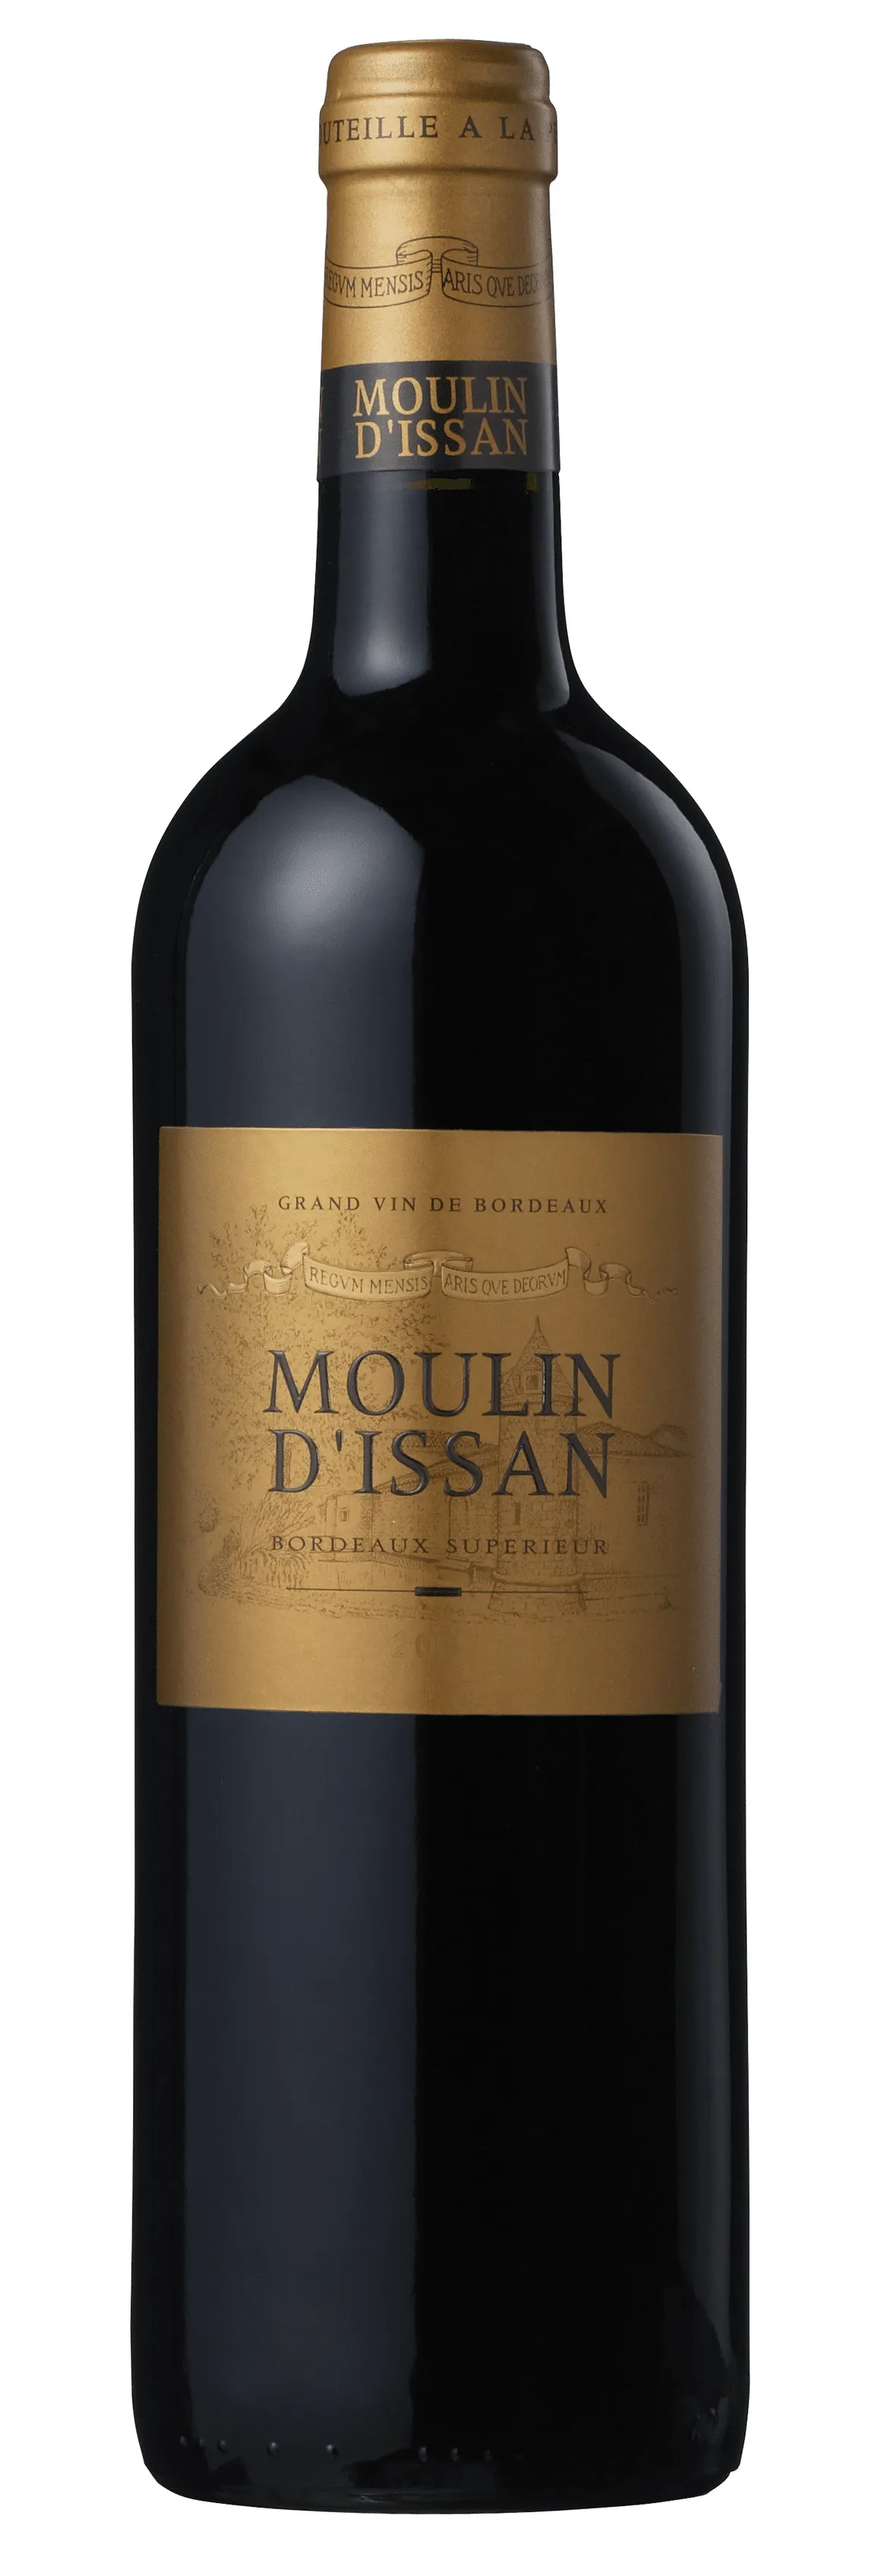 Bottle of Château d'Issan Moulin d'Issan Bordeaux Supérieur from search results